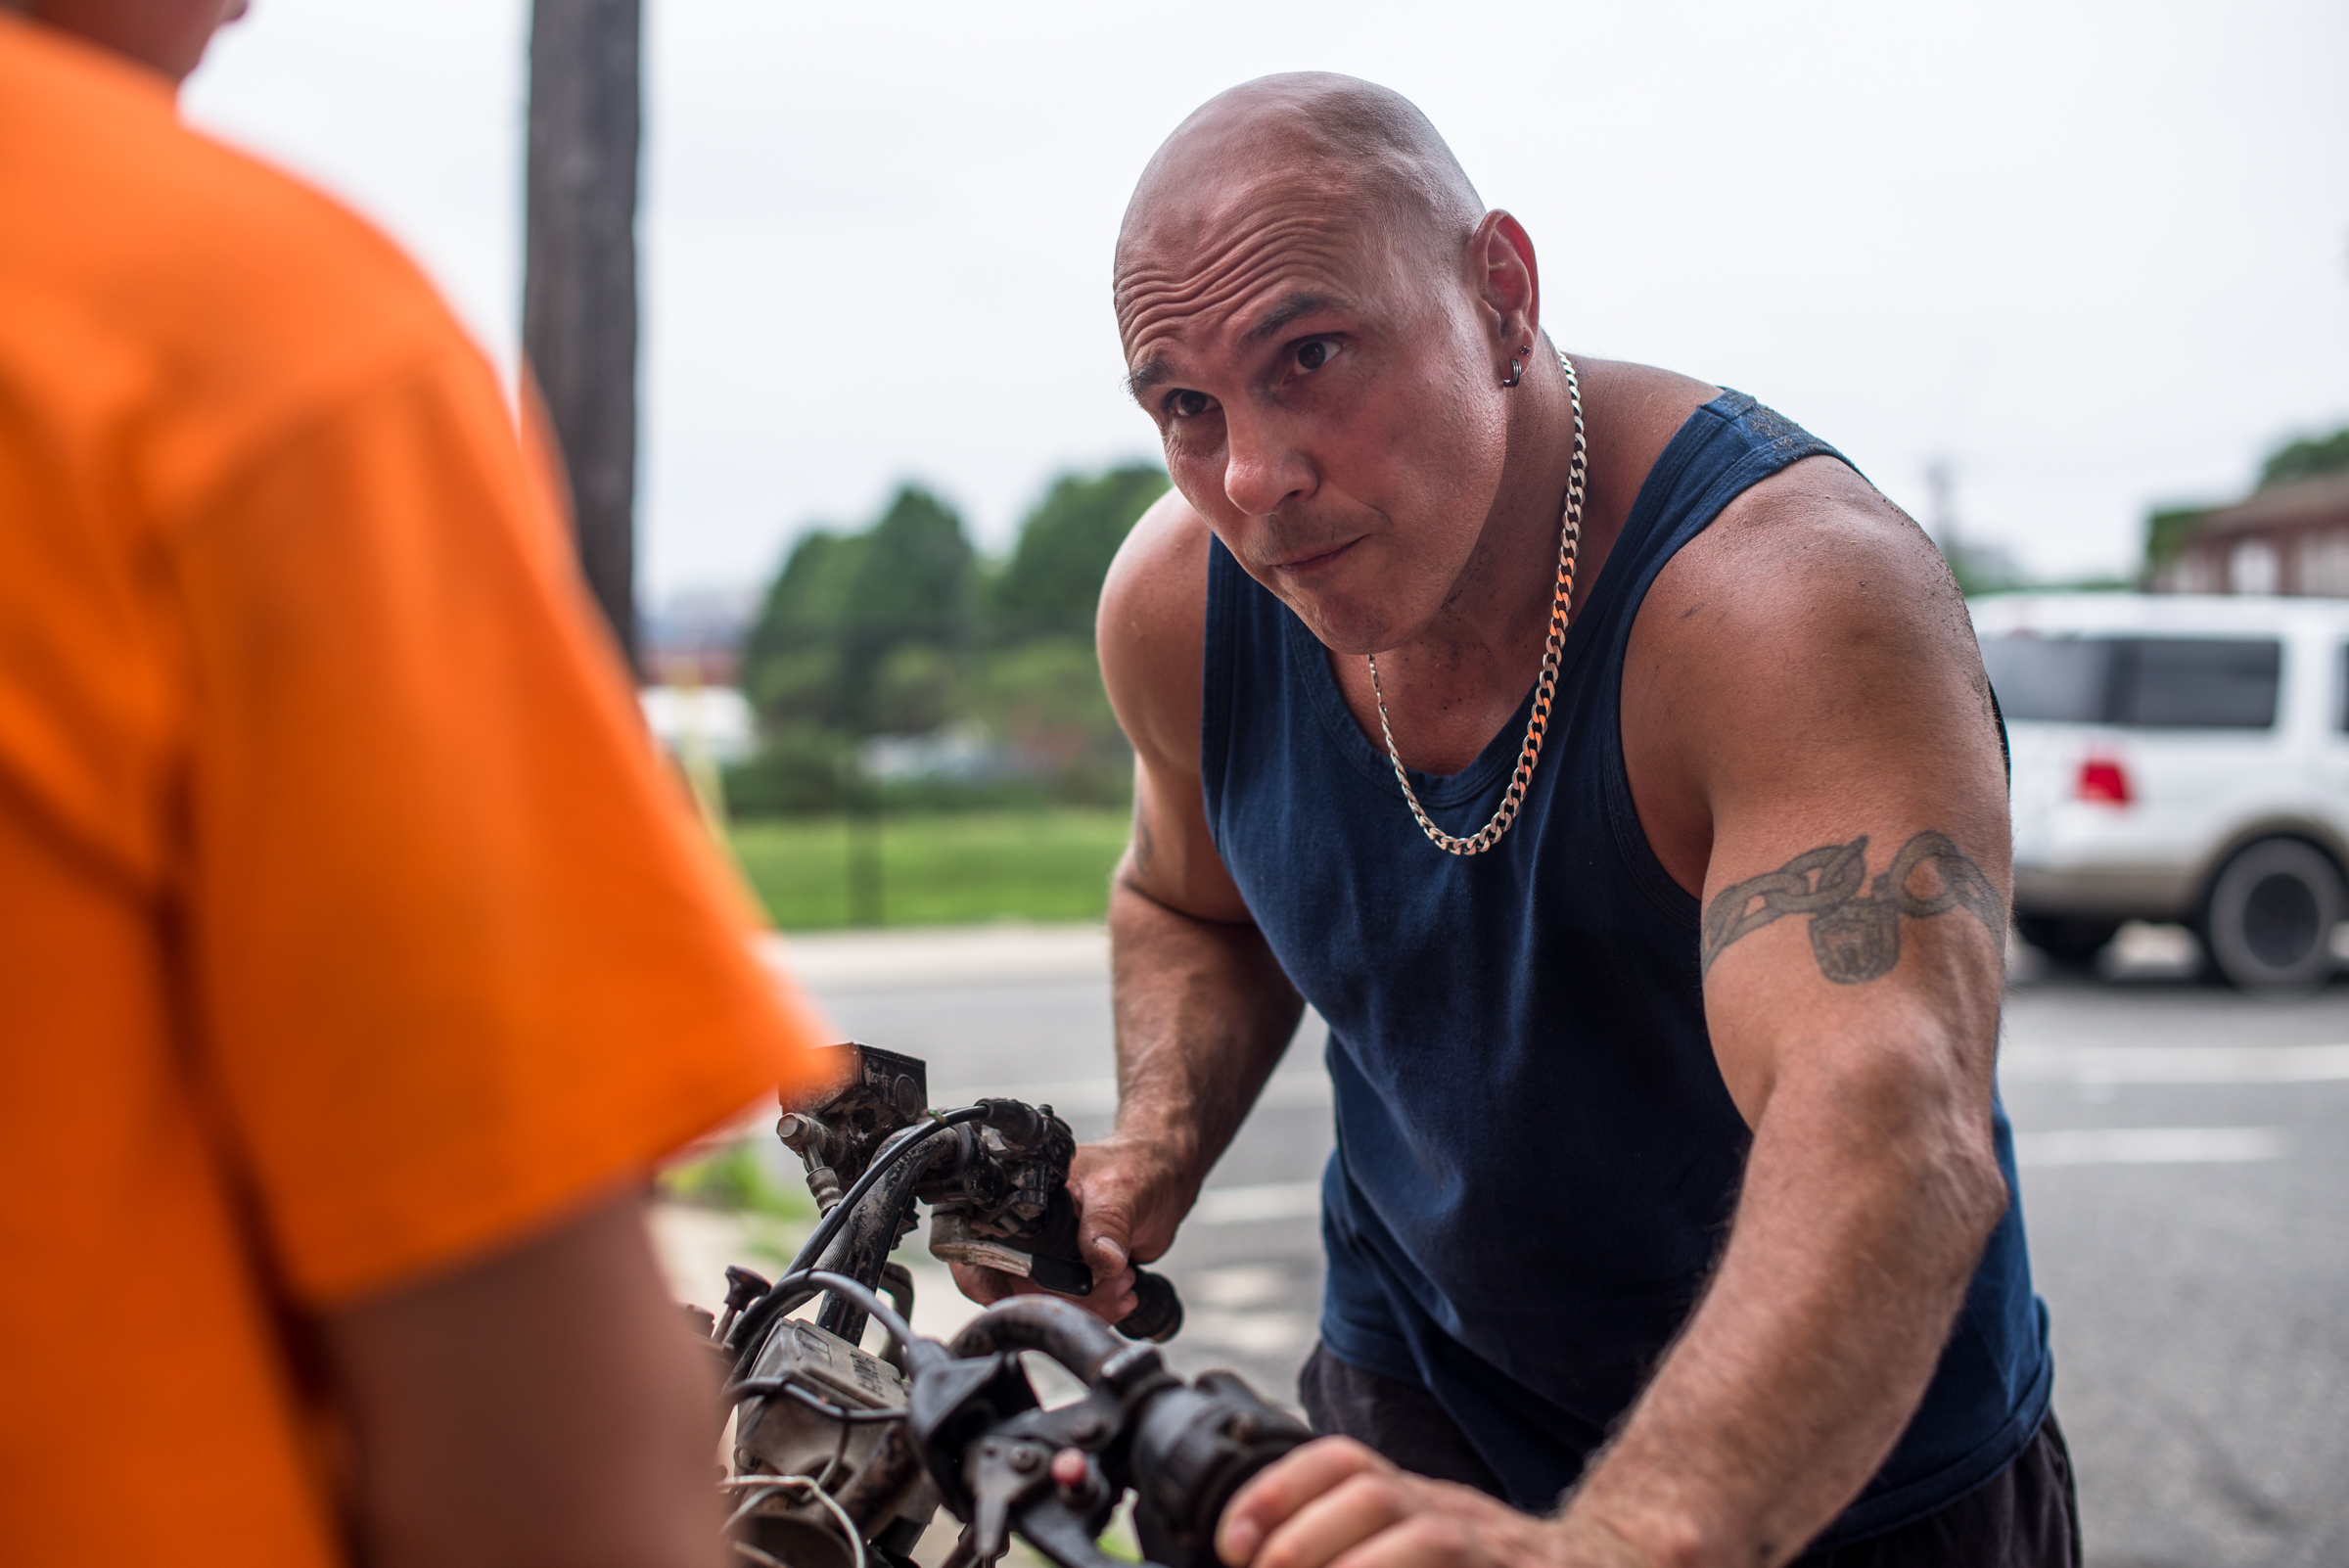 Philadelphia, PA - June 20, 2015 - Forgotten Bottom. Anthony and his son working on the brakes of their ATV/Quad, which is from 1986. They got it for free.